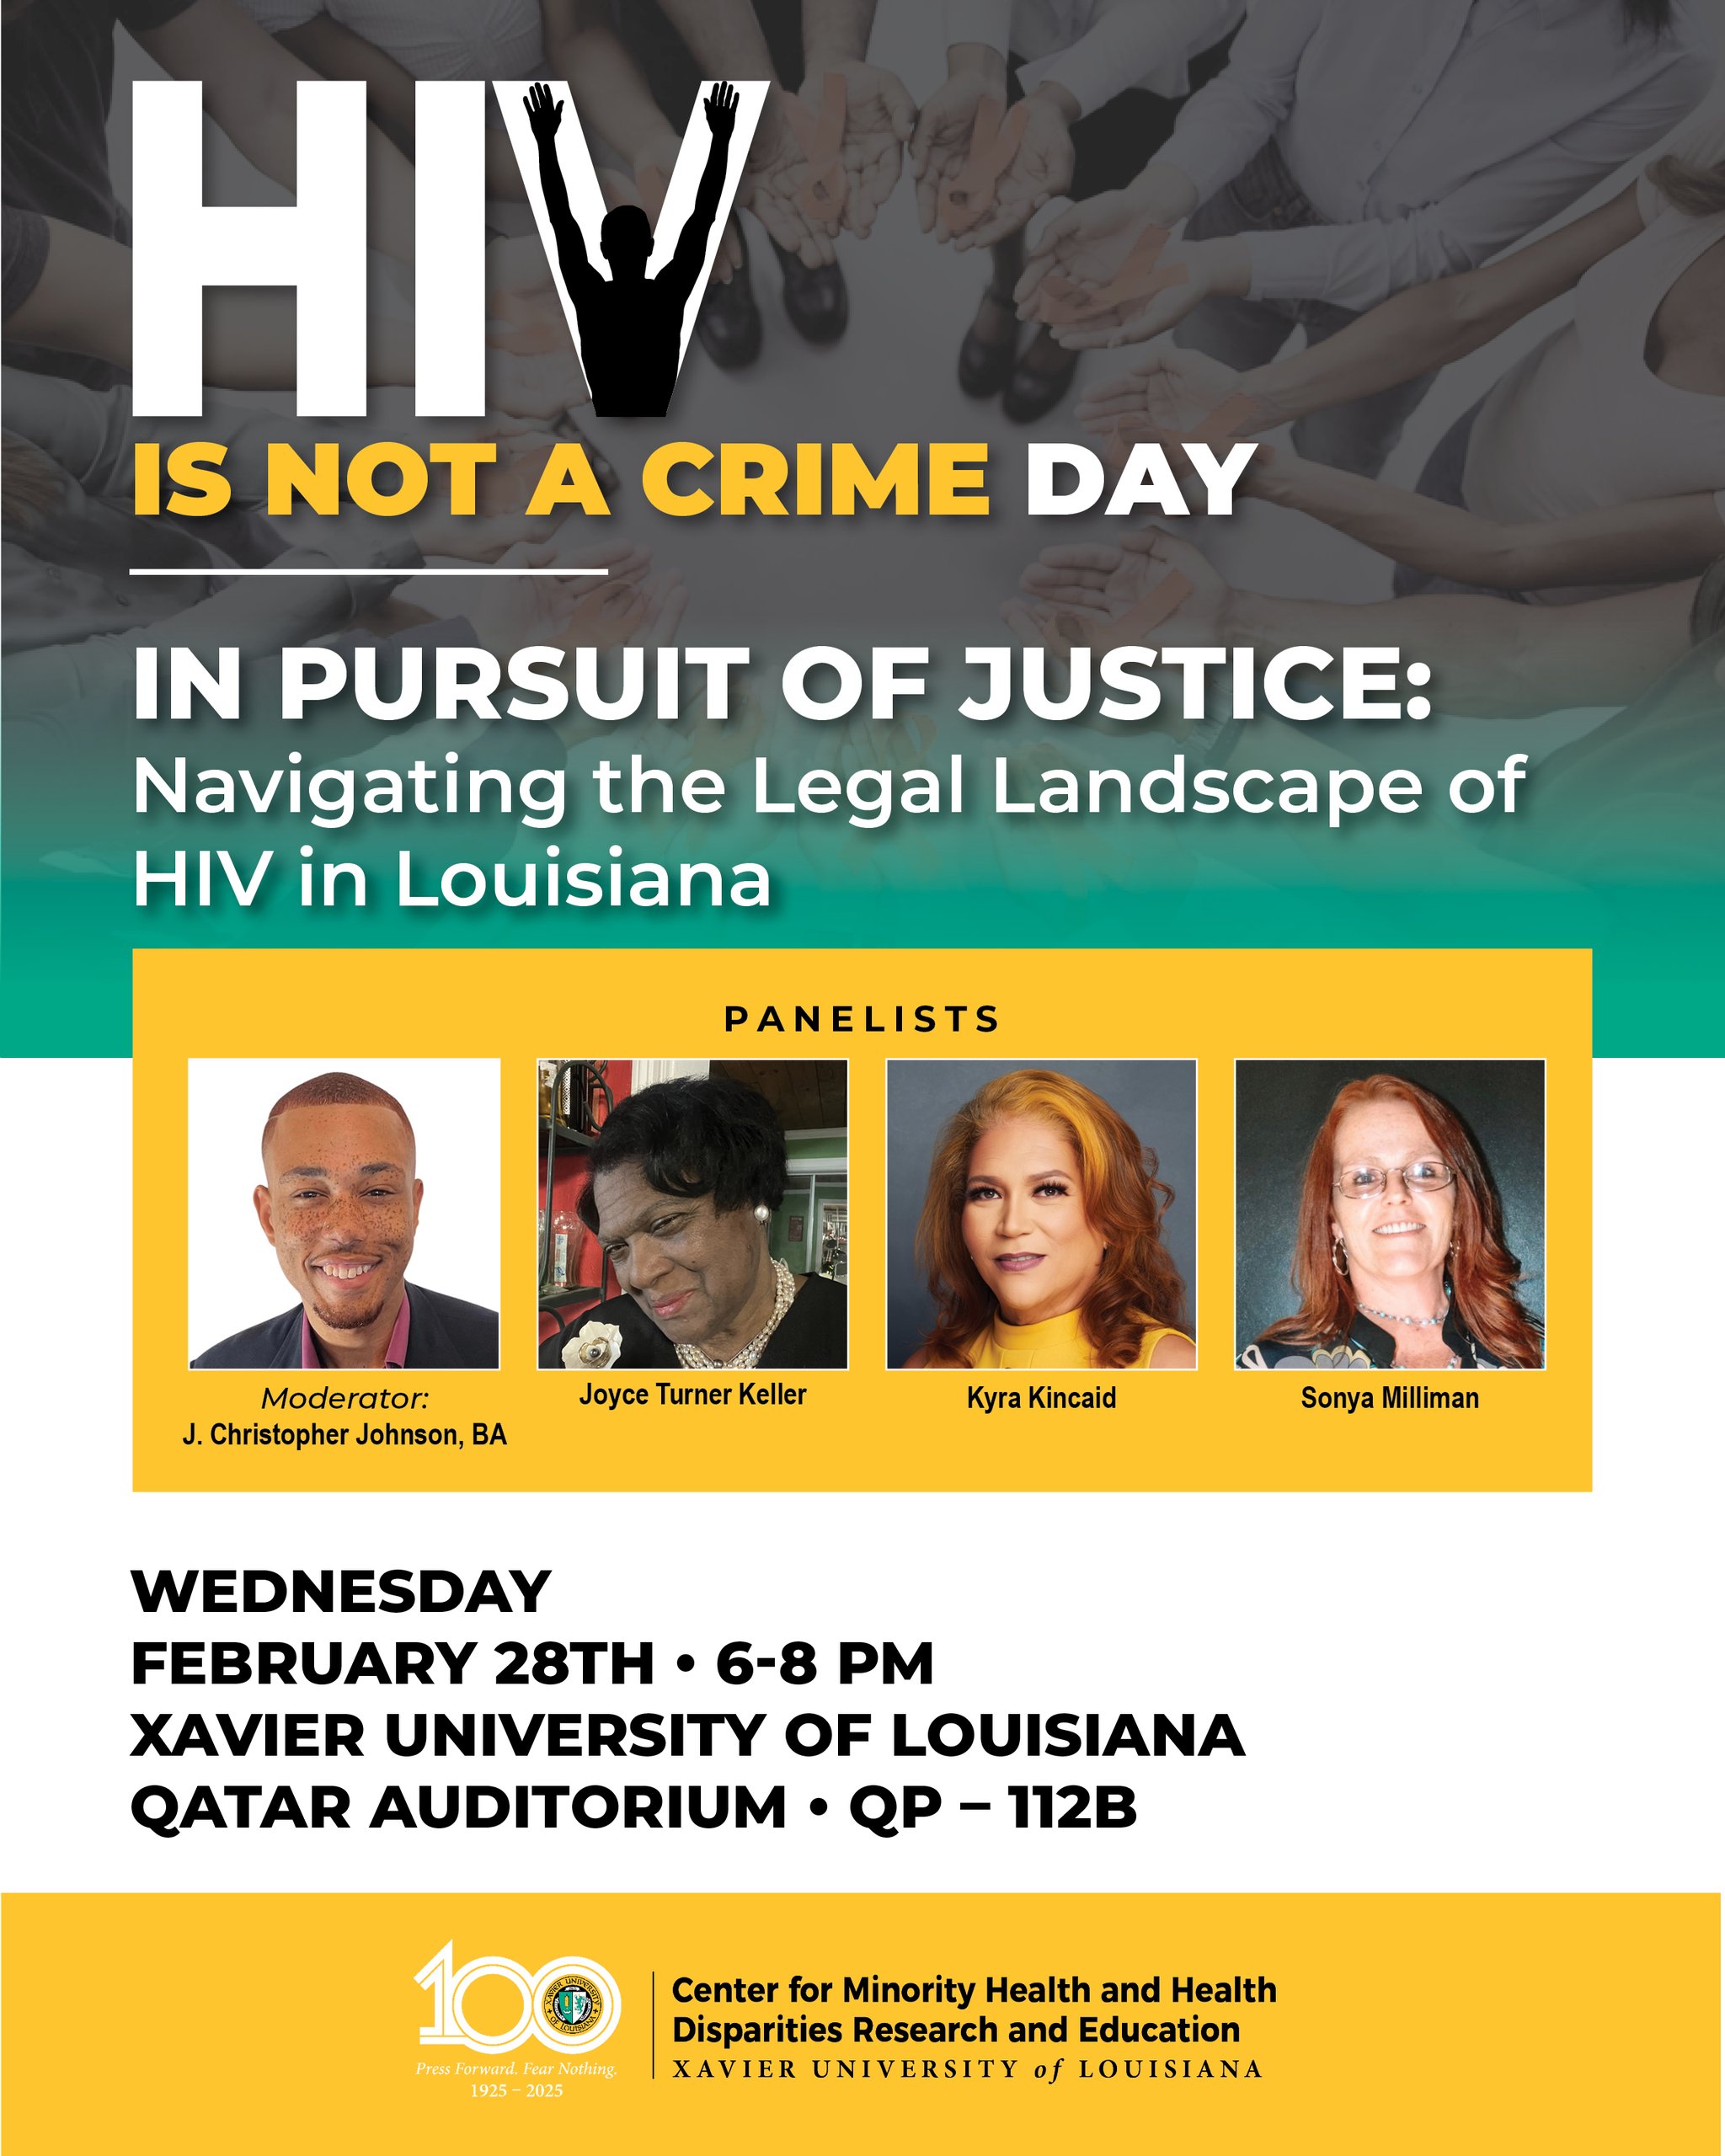 In Pursuit of Justice: Navigating the Legal Landscape of HIV in Louisiana 